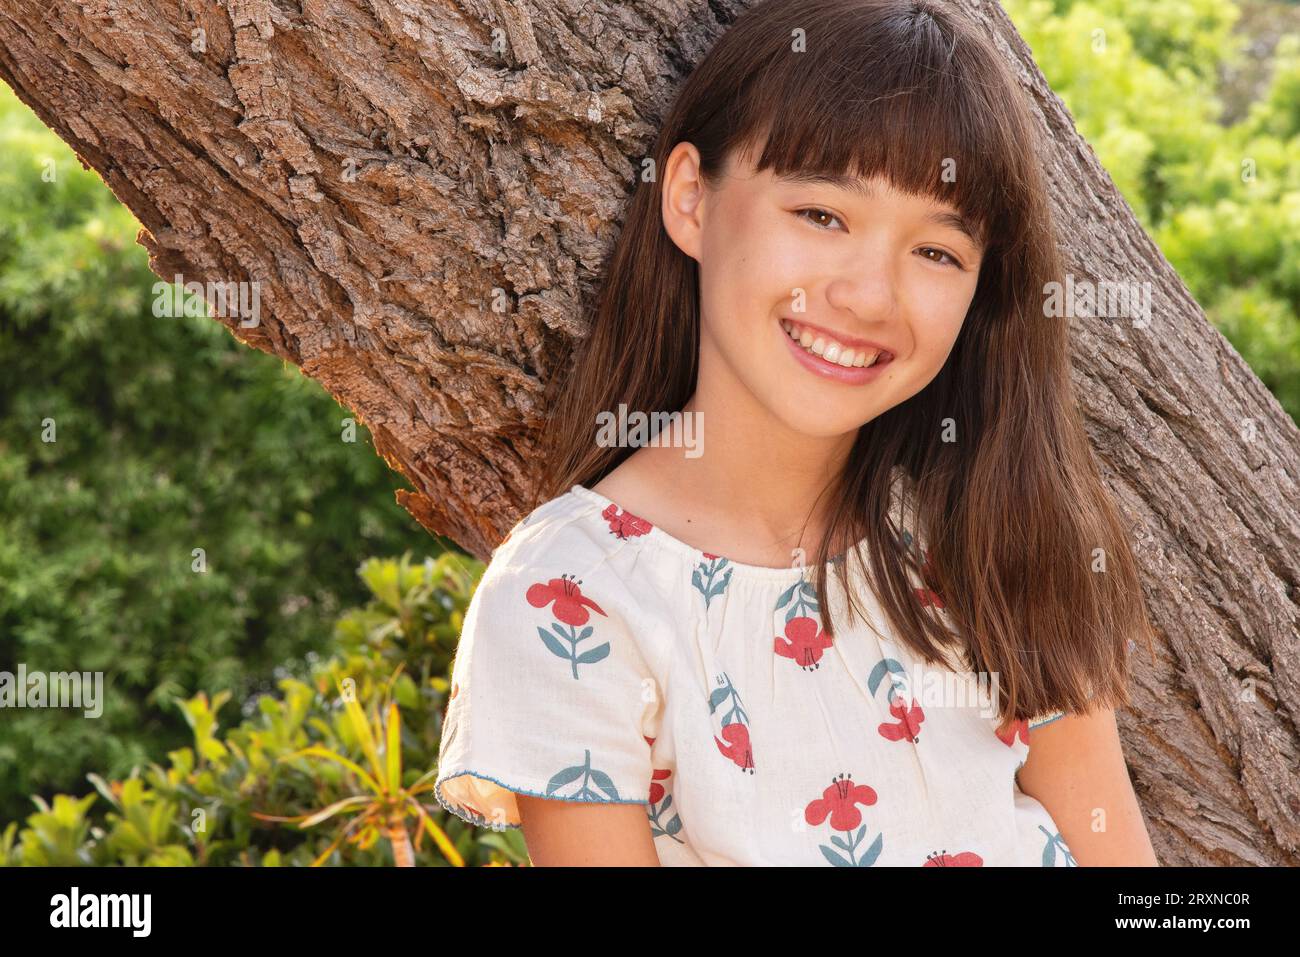 Eleven year old smiling girl leaning against a tree Stock Photo